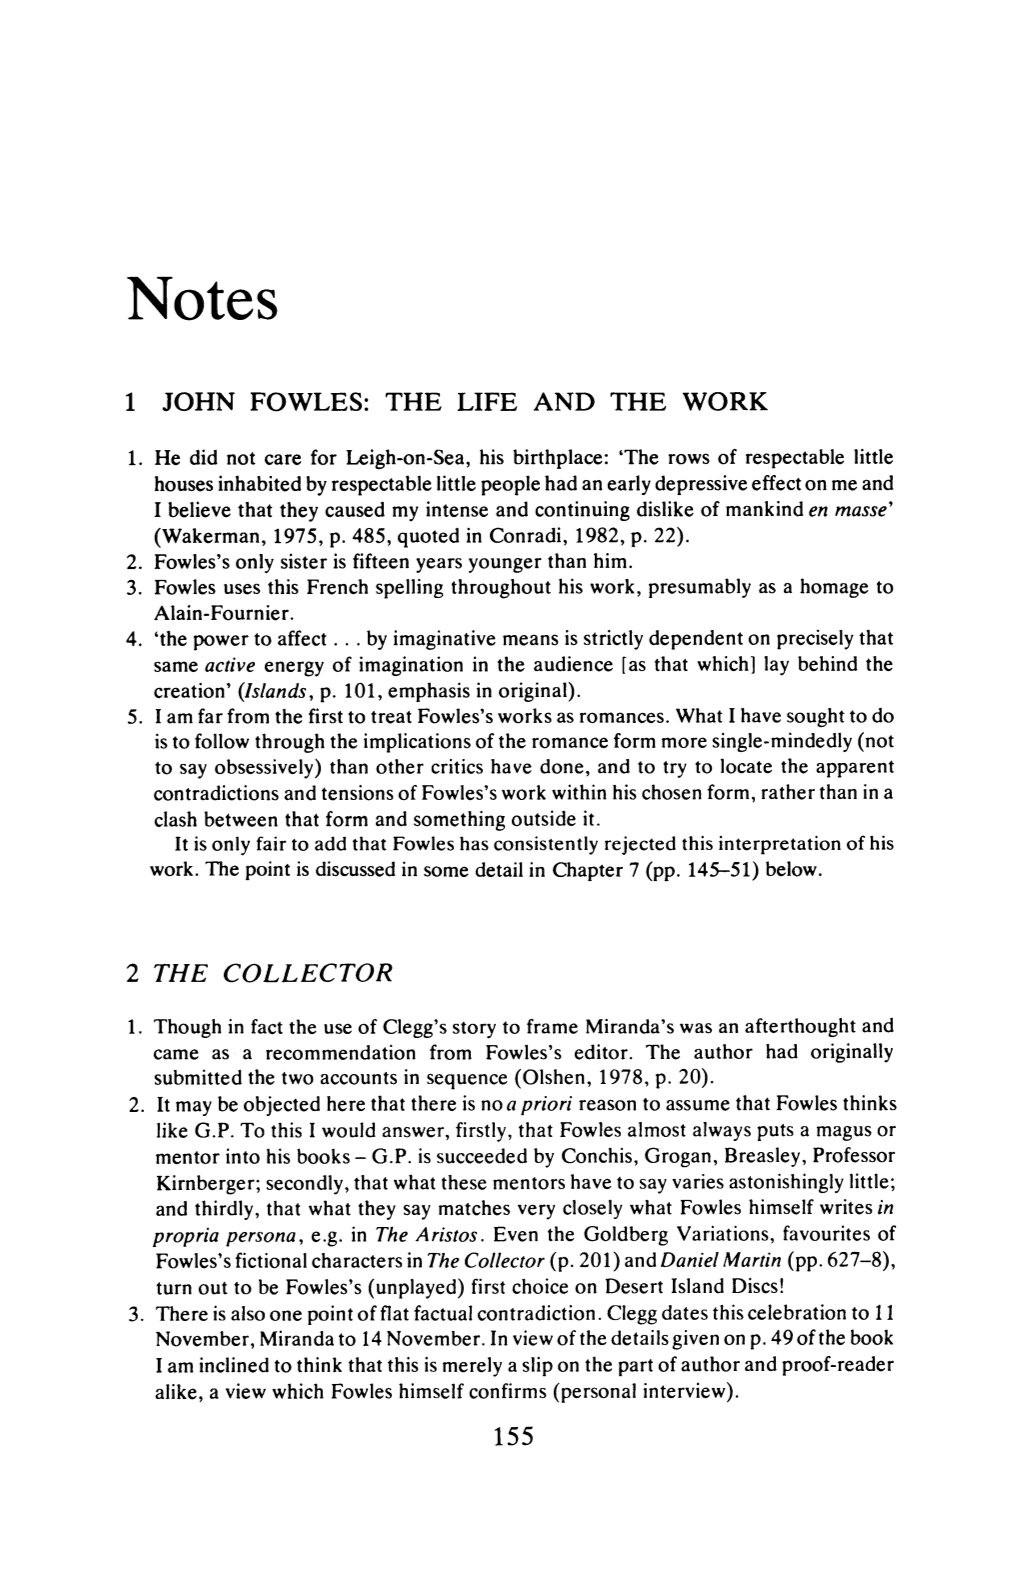 1 John Fowles: the Life and the Work 2 the Collector